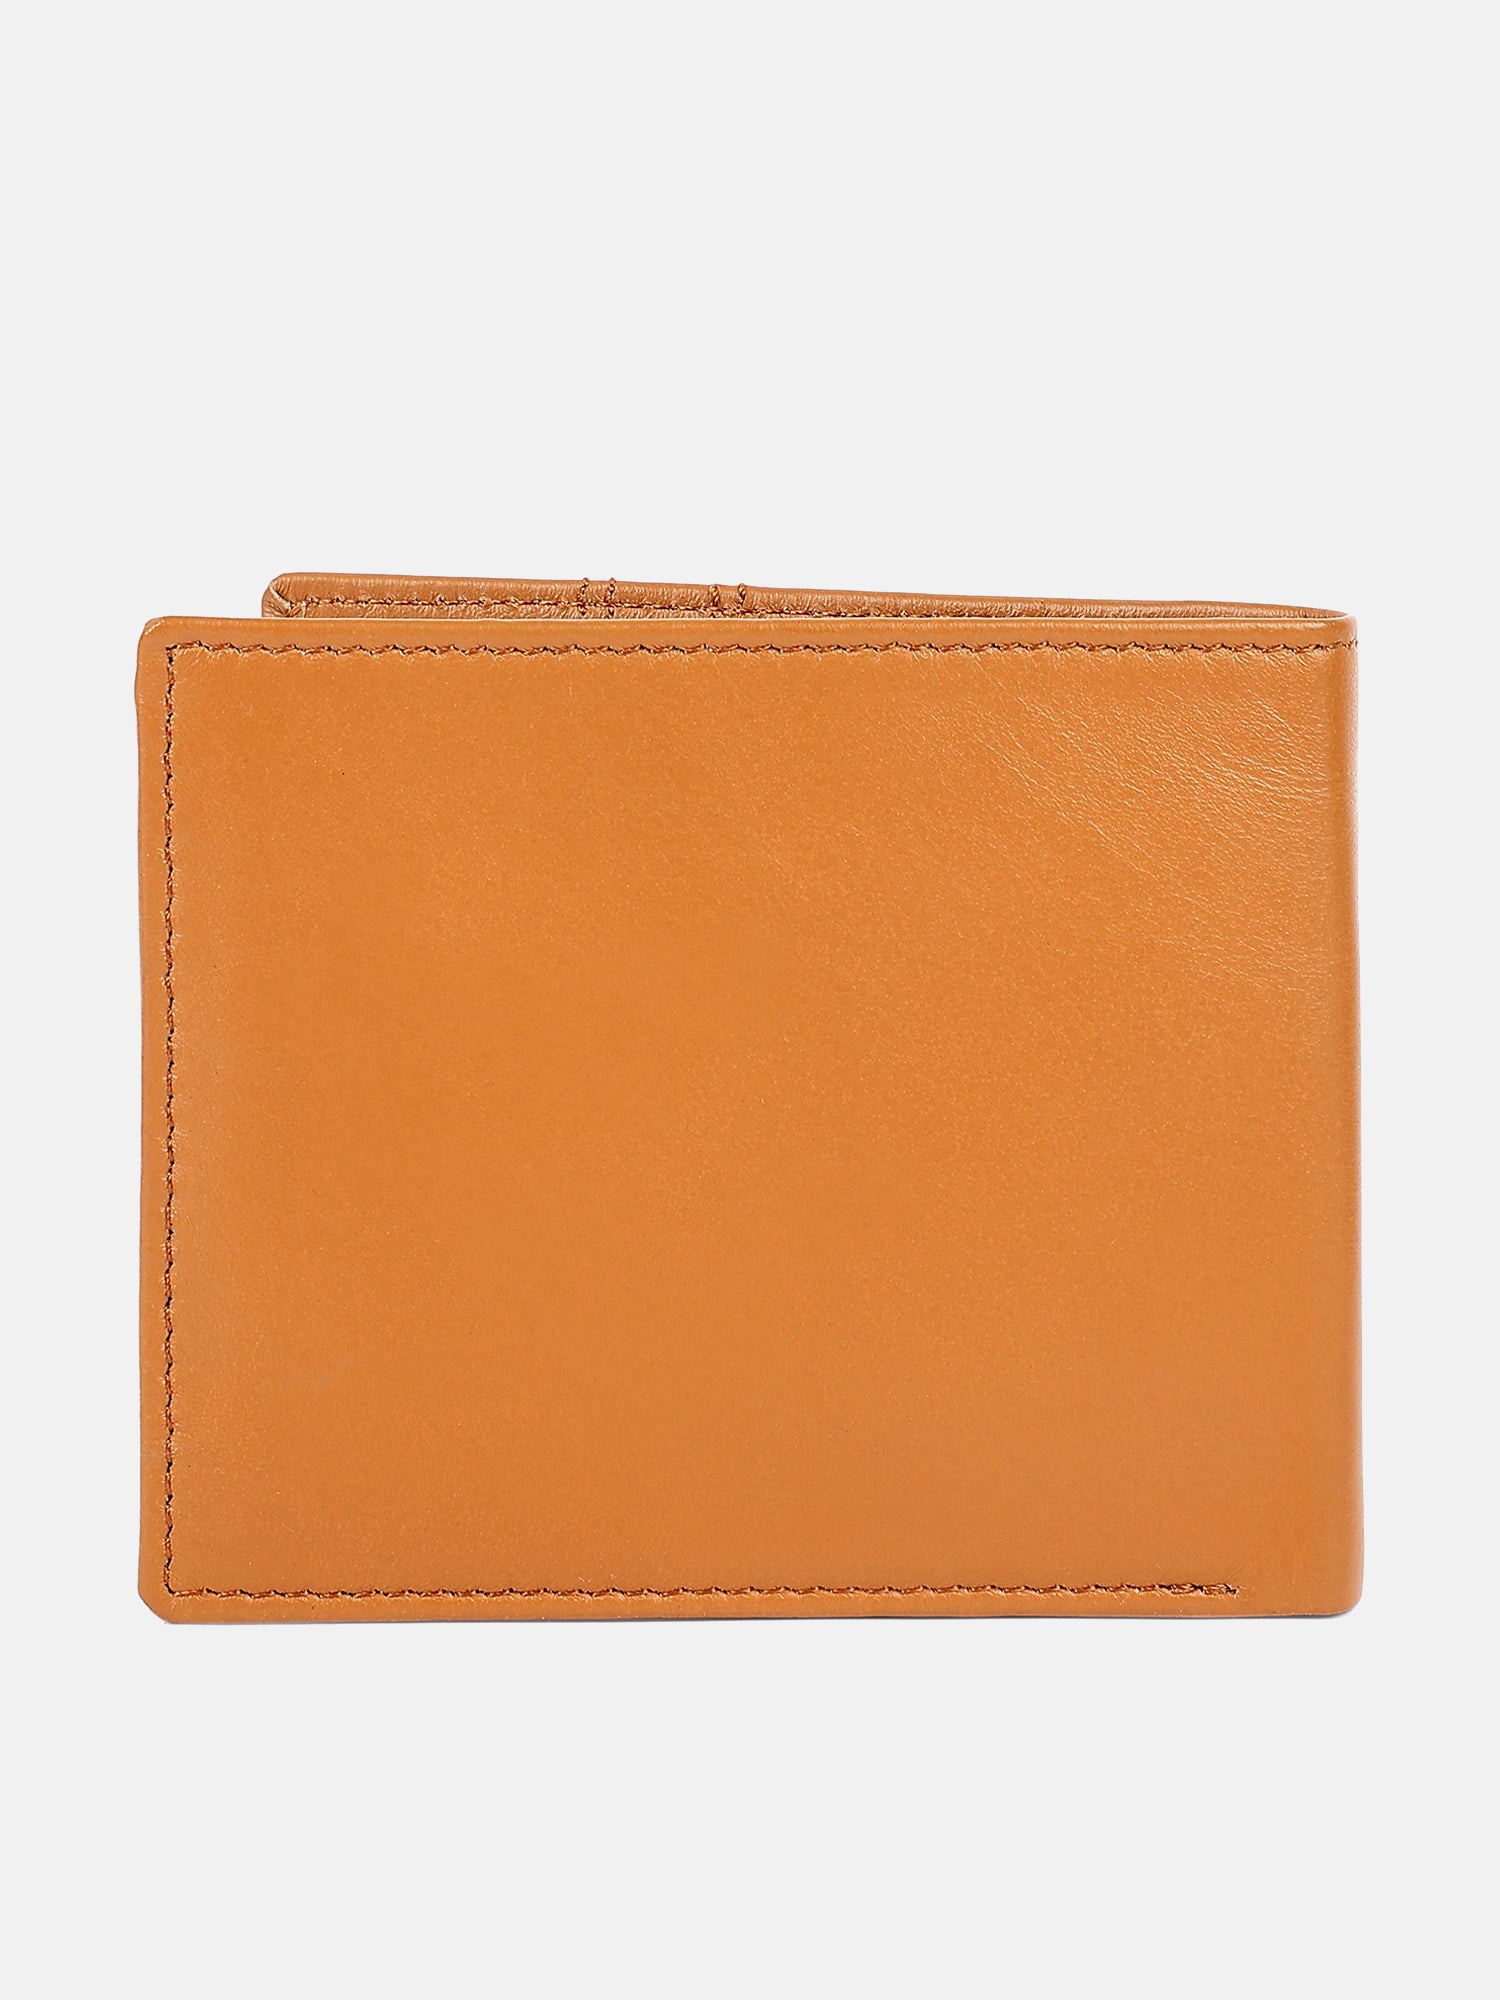 53% OFF on Gents Wallet on Snapdeal | PaisaWapas.com